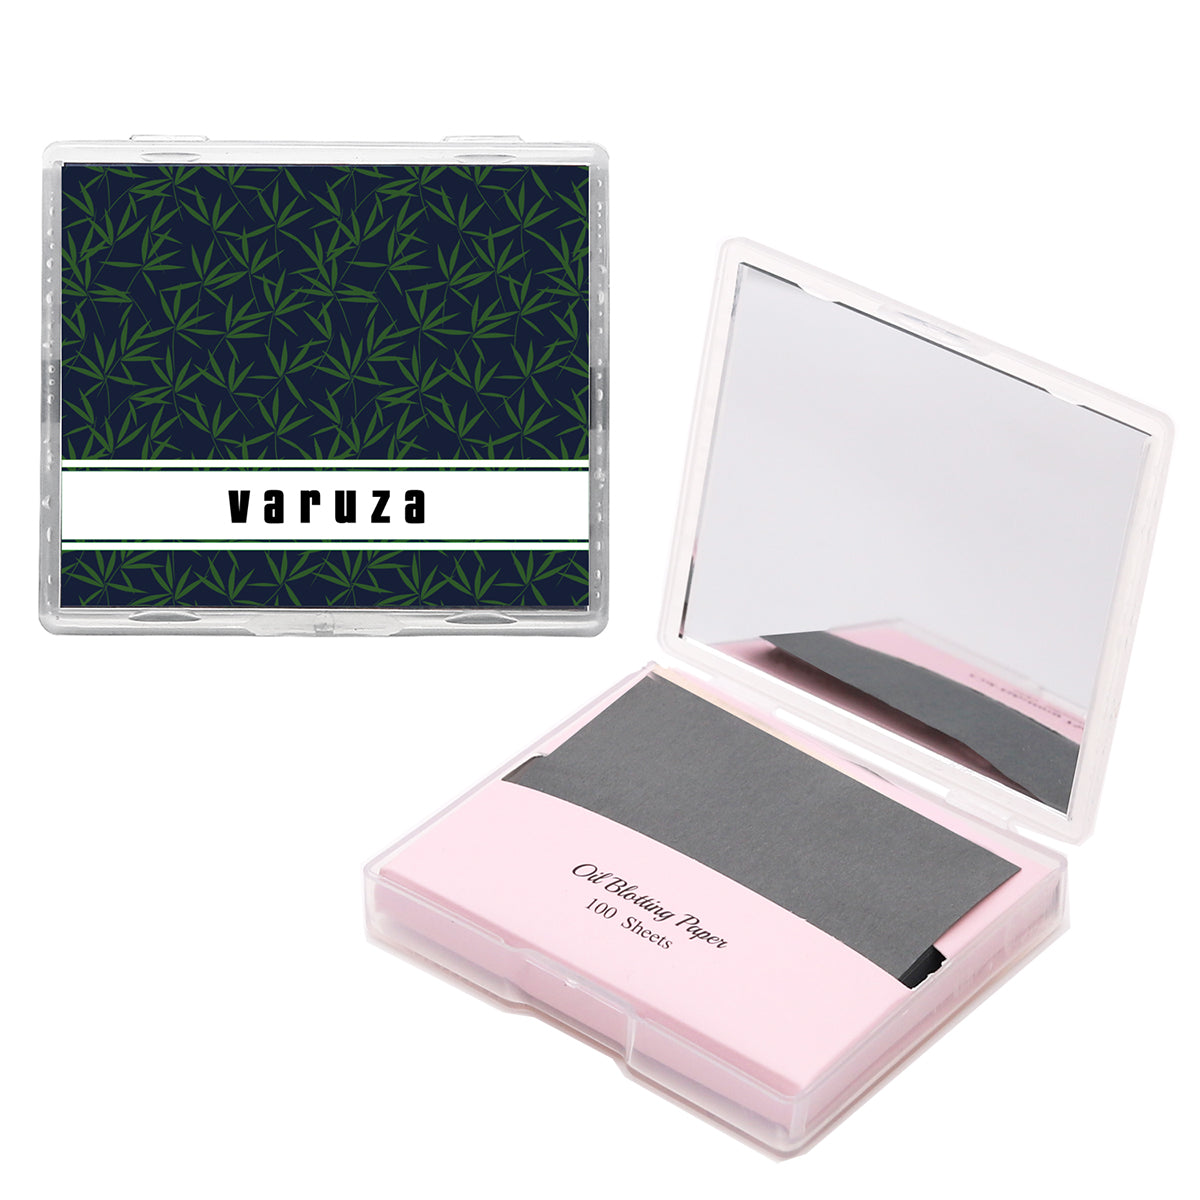 Natural Hemp Face Oil Blotting Paper with Mirror Case and Refills - Charcoal